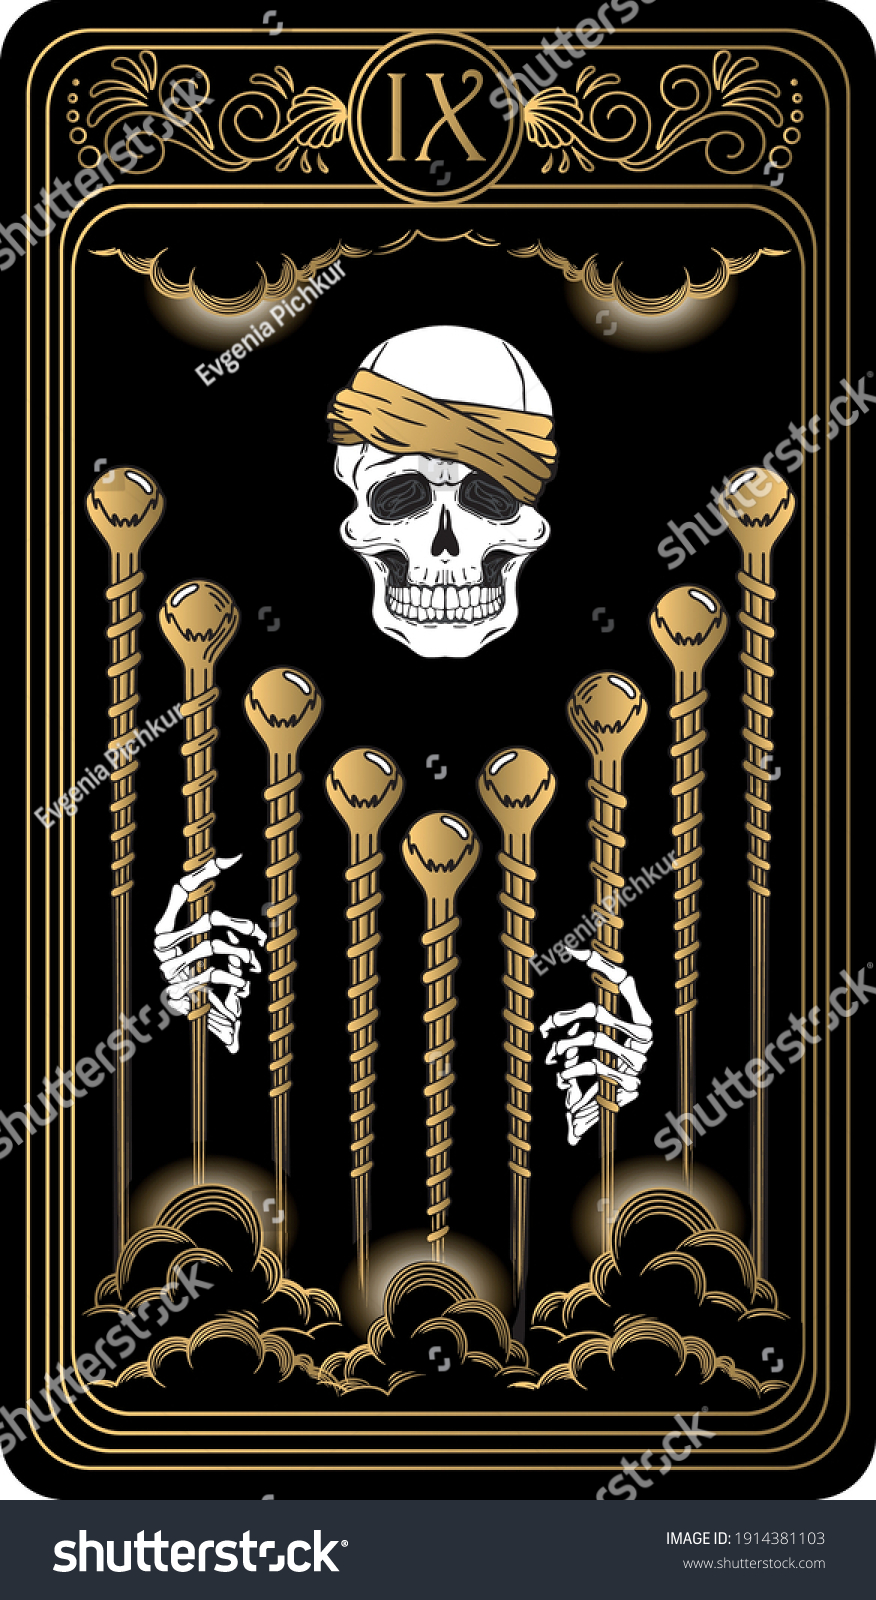 SVG of Nine of wands. Card of Minor arcana black and gold tarot cards. Tarot deck. Vector hand drawn illustration with scull, occult, mystical and esoteric symbols. svg